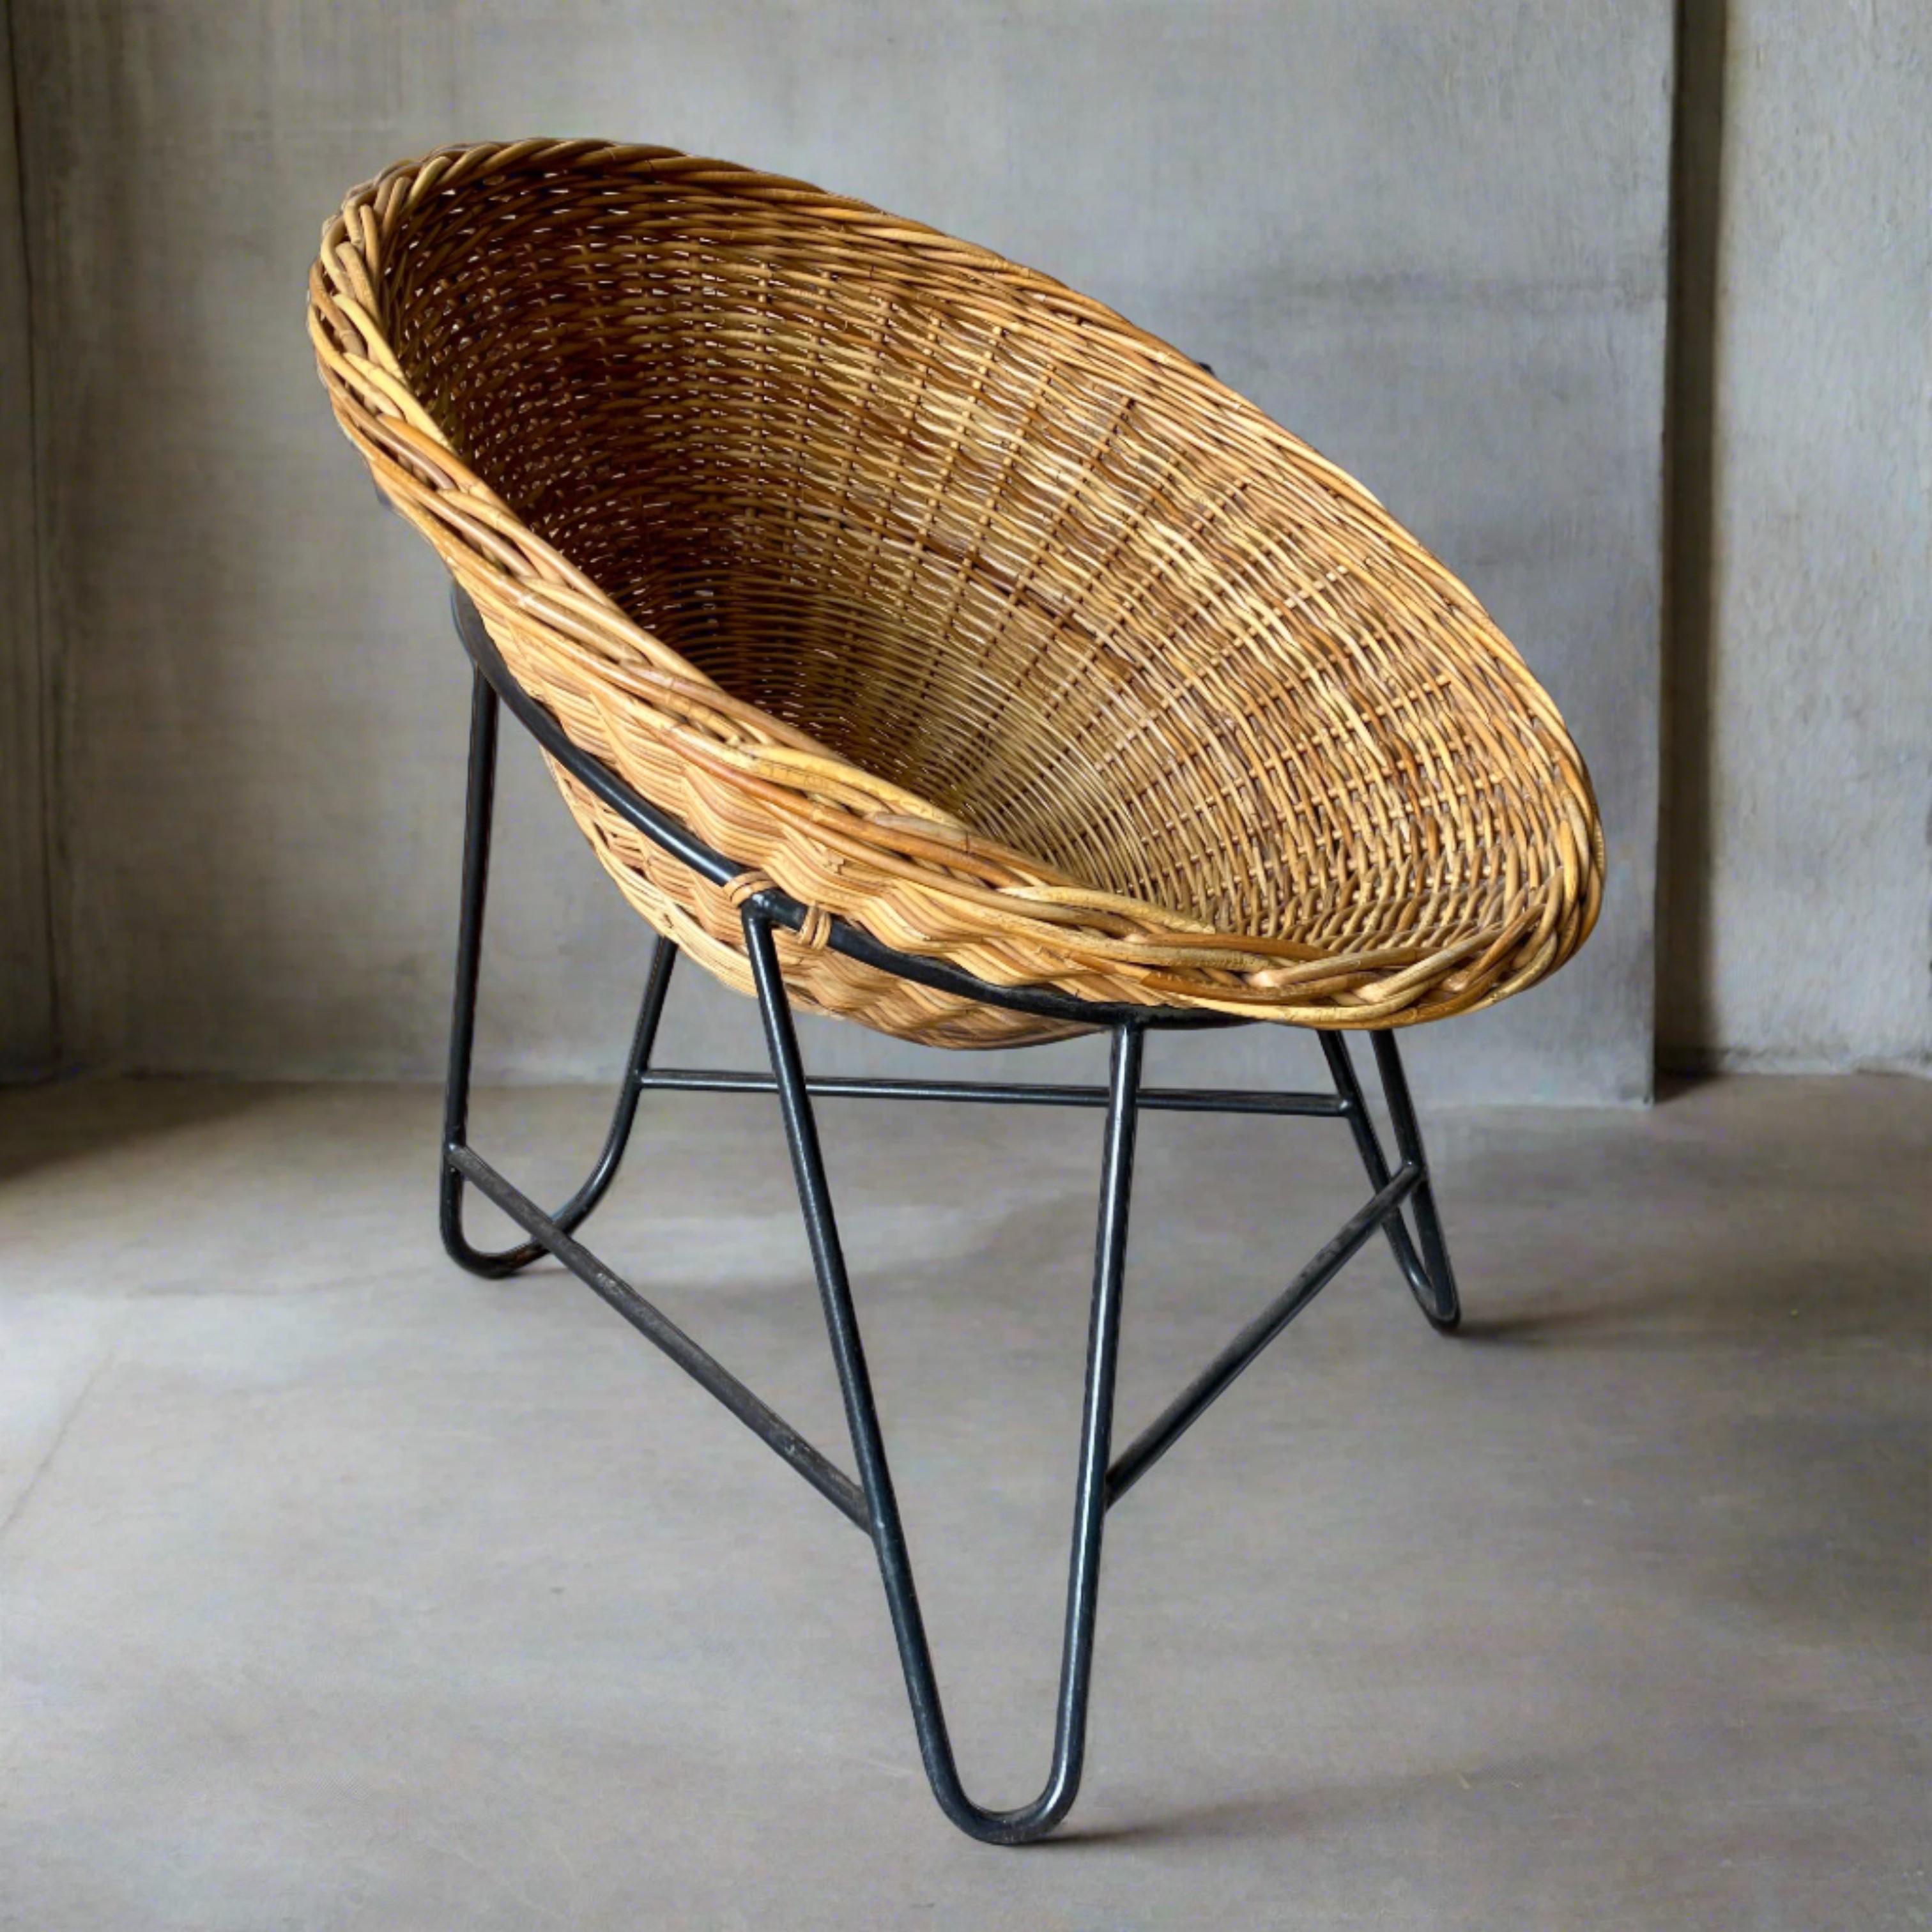 4 x Mathieu Matégot Wicker Lounge Chairs, France 1950s.

These iconic pieces are not just chairs; they are timeless works of art that effortlessly merge form with function.

Crafted with precision and passion, each chair boasts a sturdy metal base